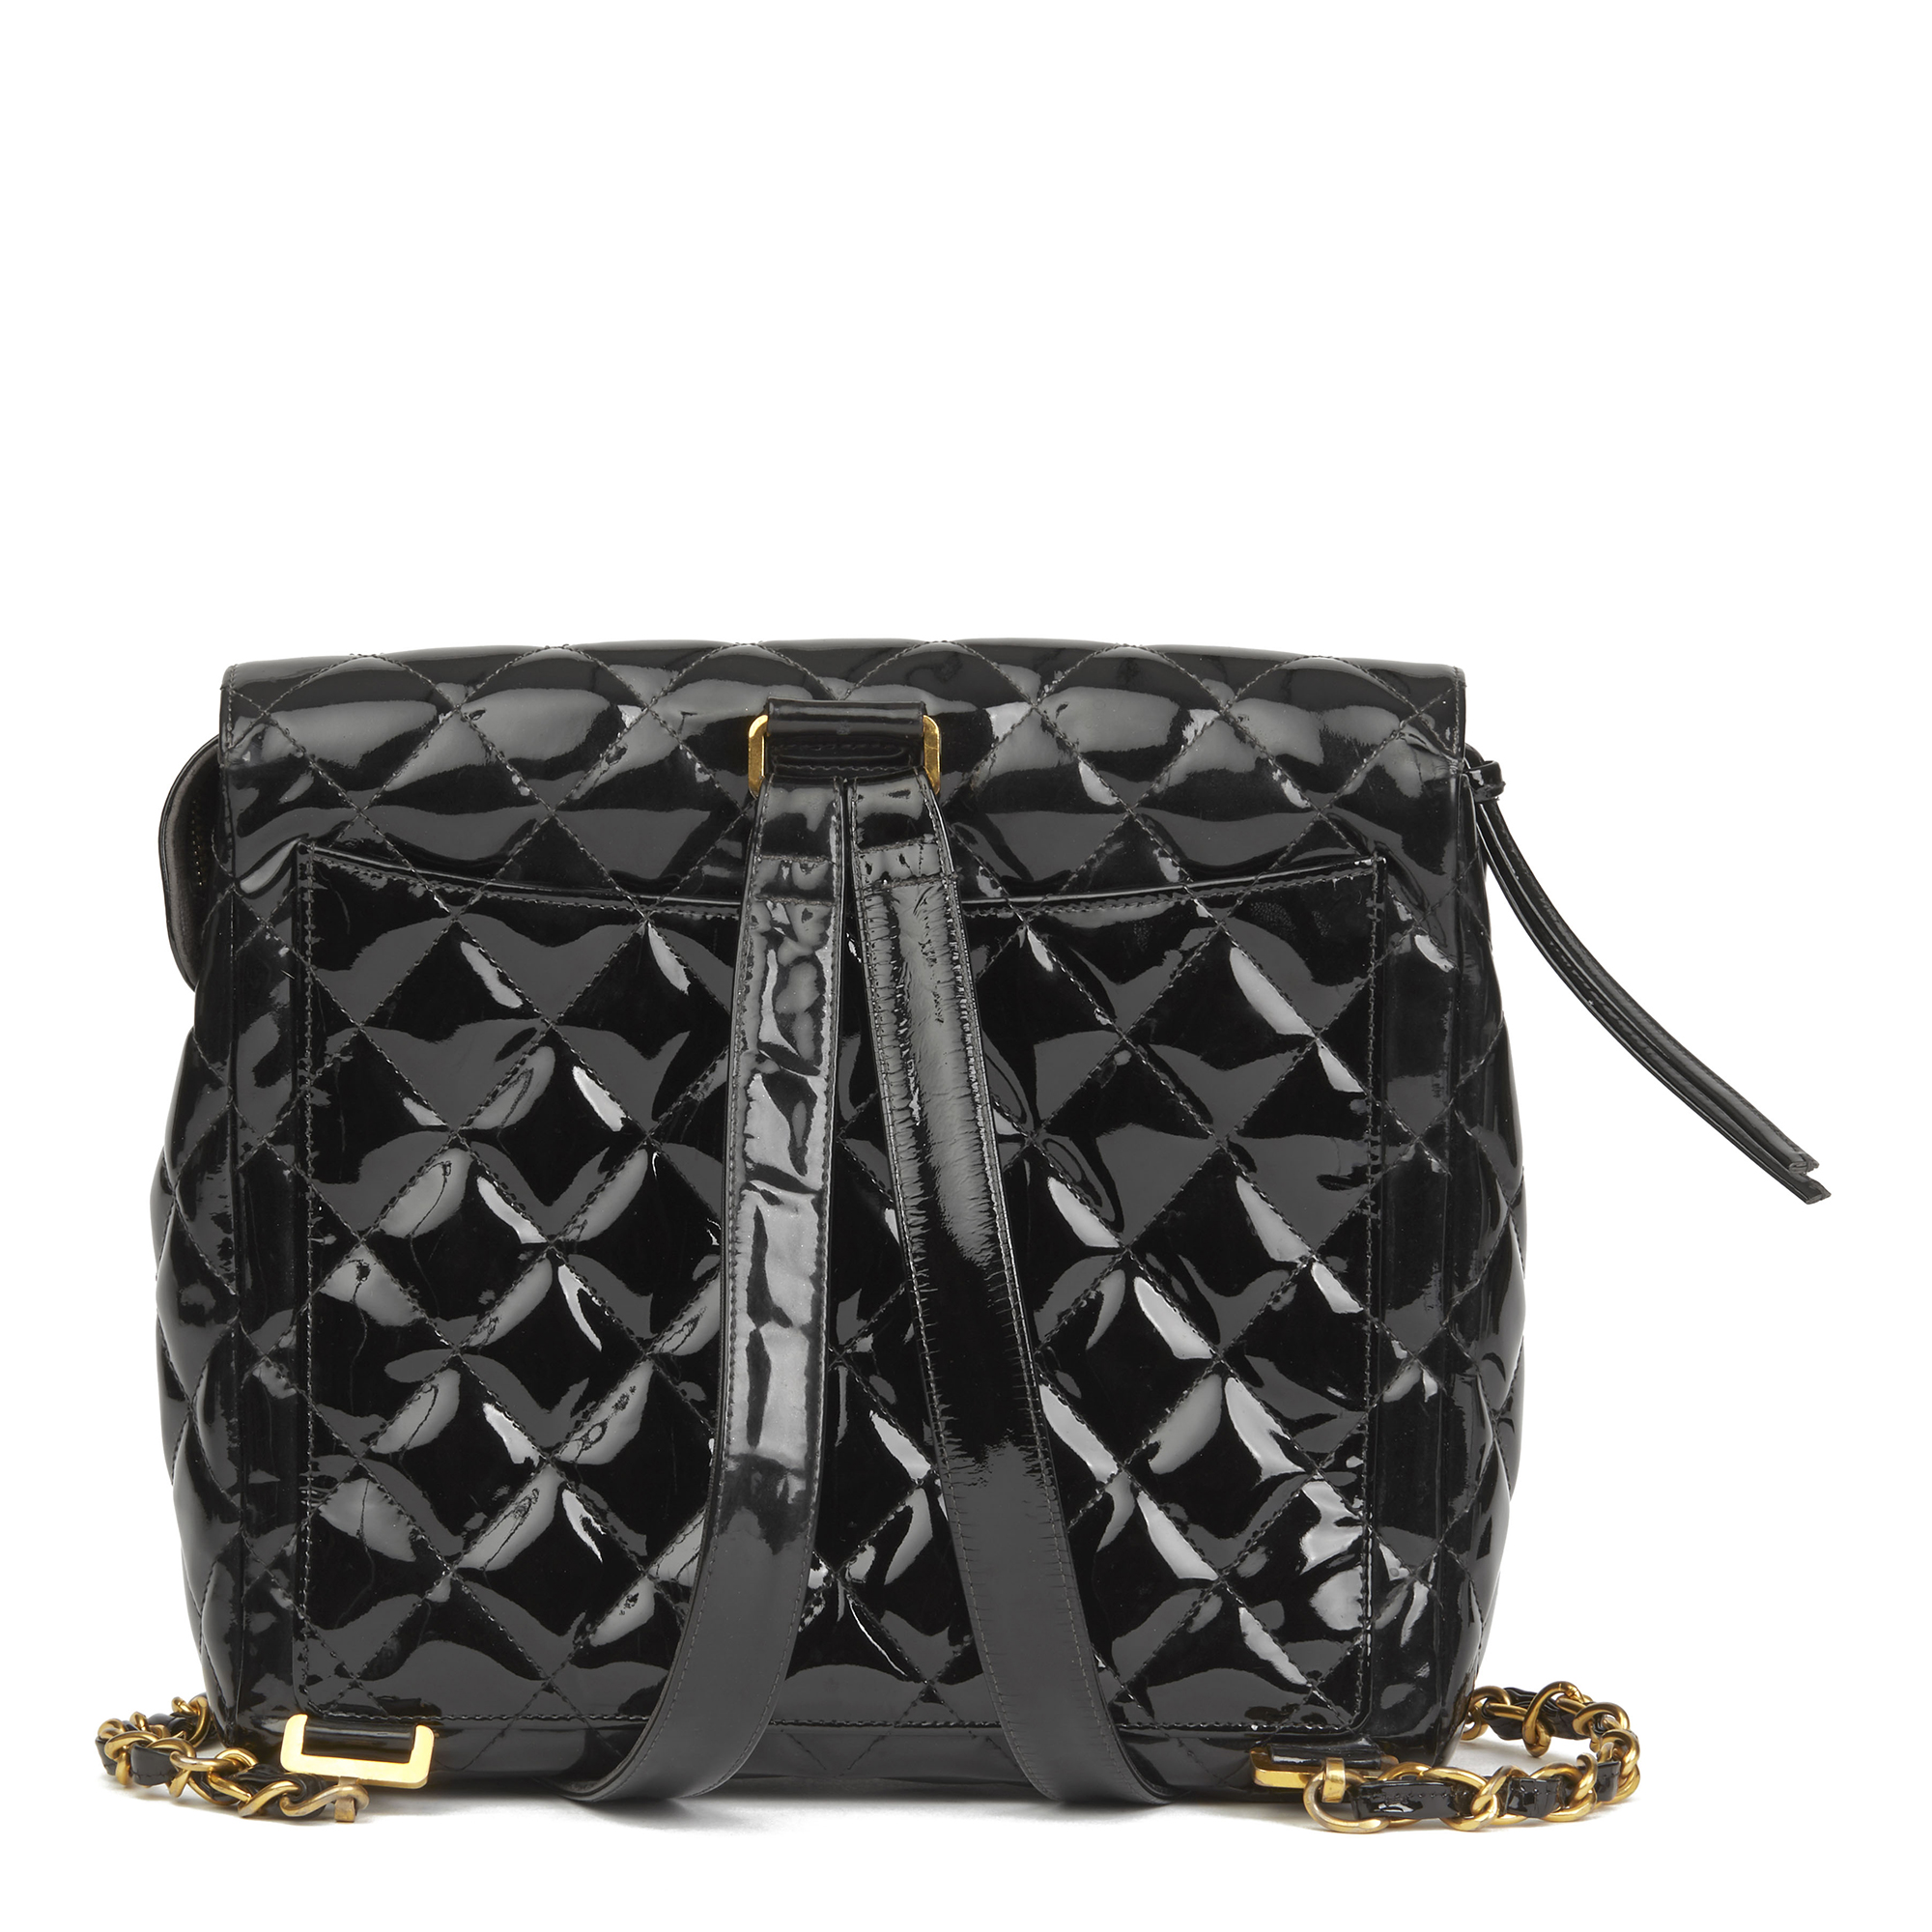 Chanel Black Quilted Patent Leather Vintage Classic Timeless Backpack - Image 10 of 12